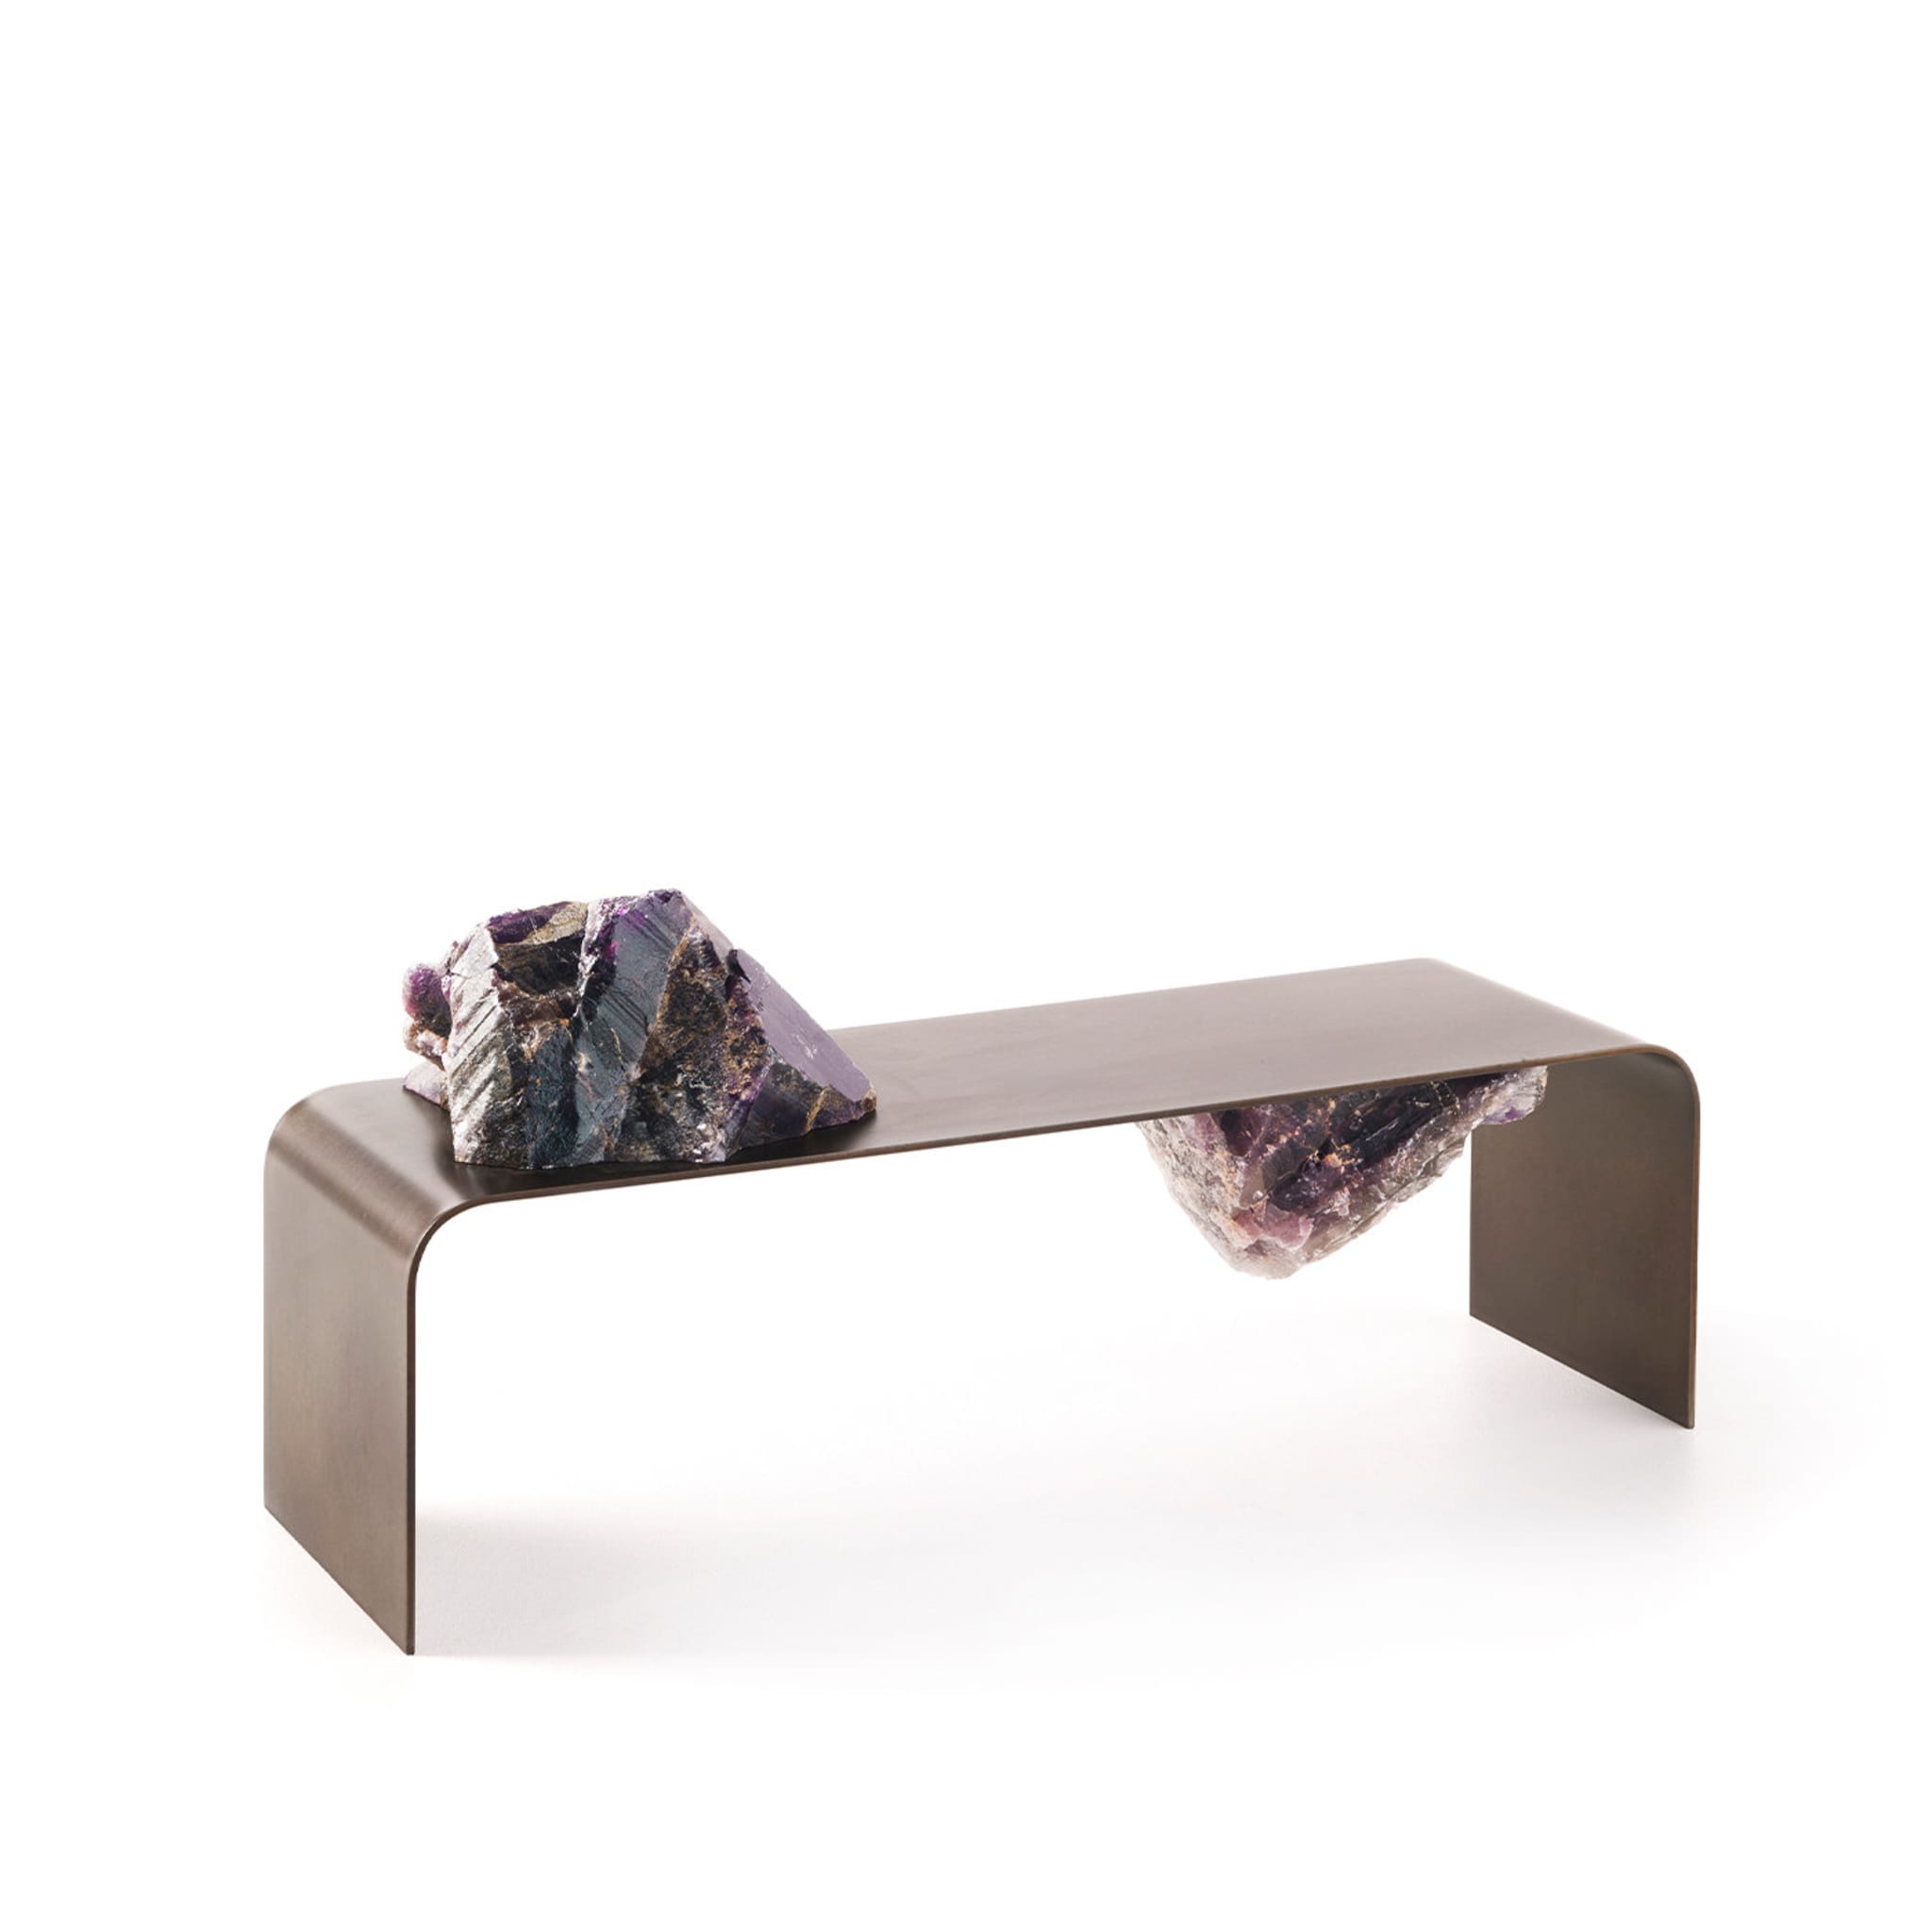 Agment  with Amethyst Stones Centerpiece by CTRLZAK - Alternative view 1